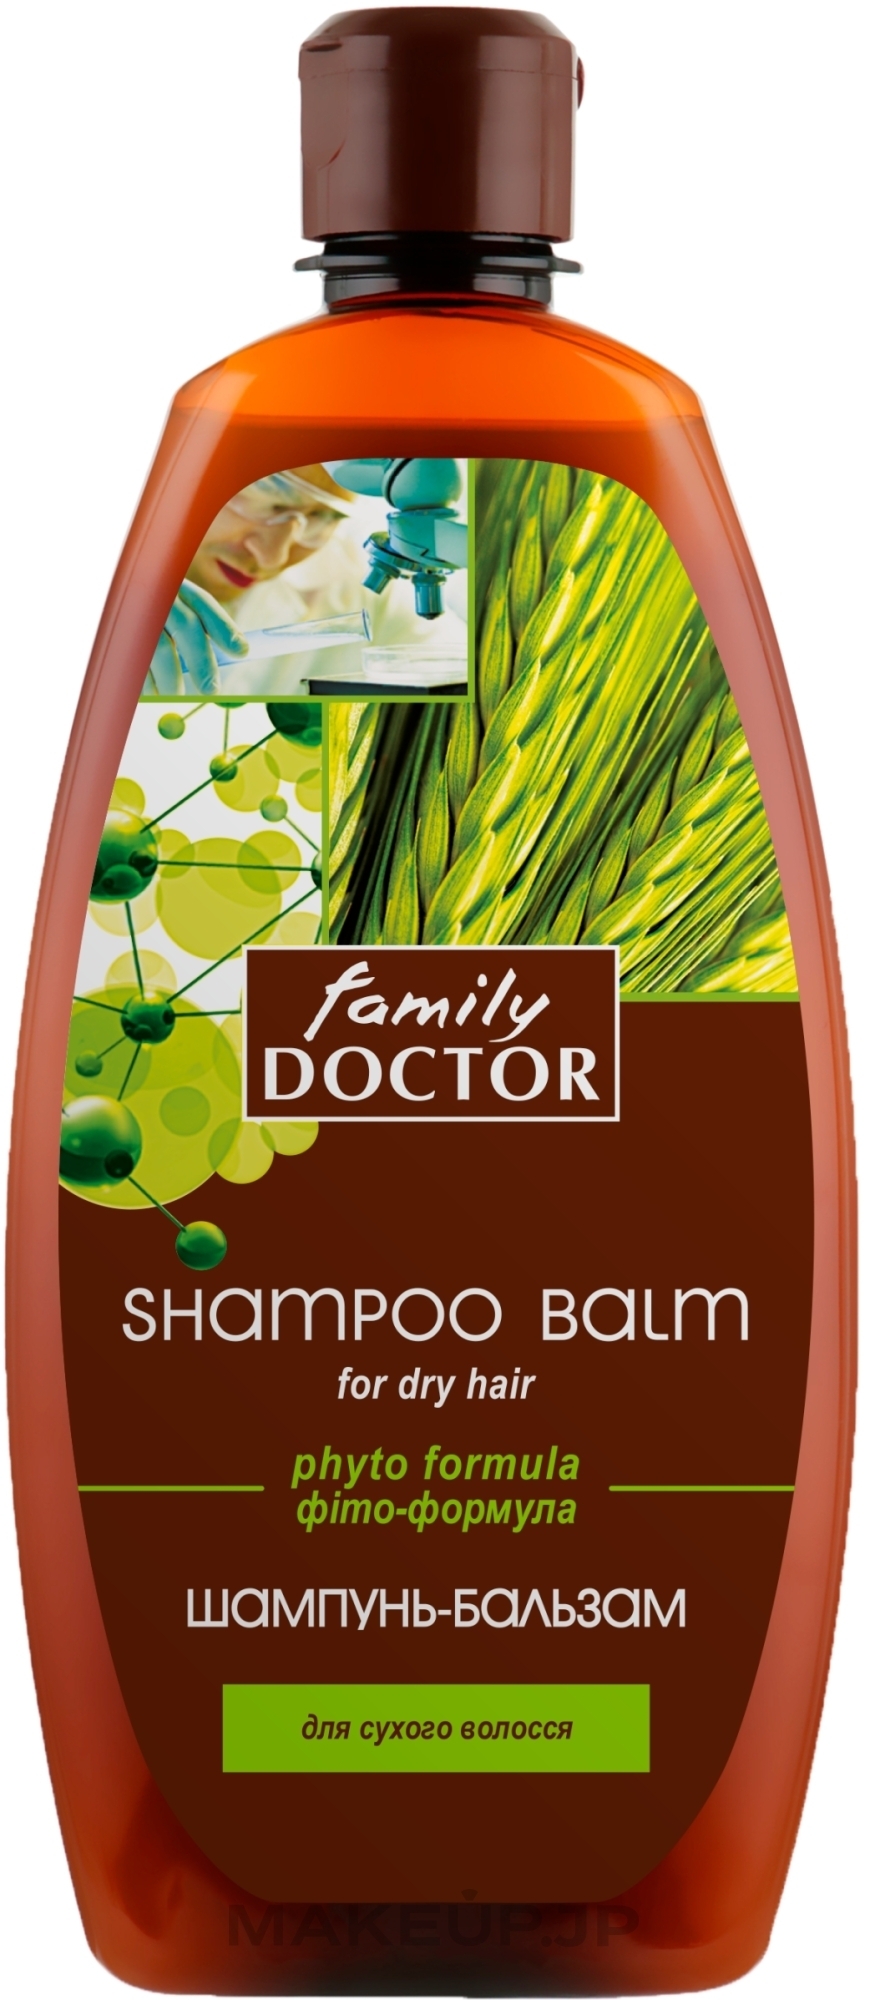 Shampoo & Conditioner for Dry Hair "Phyto Formula" - Family Doctor — photo 500 ml